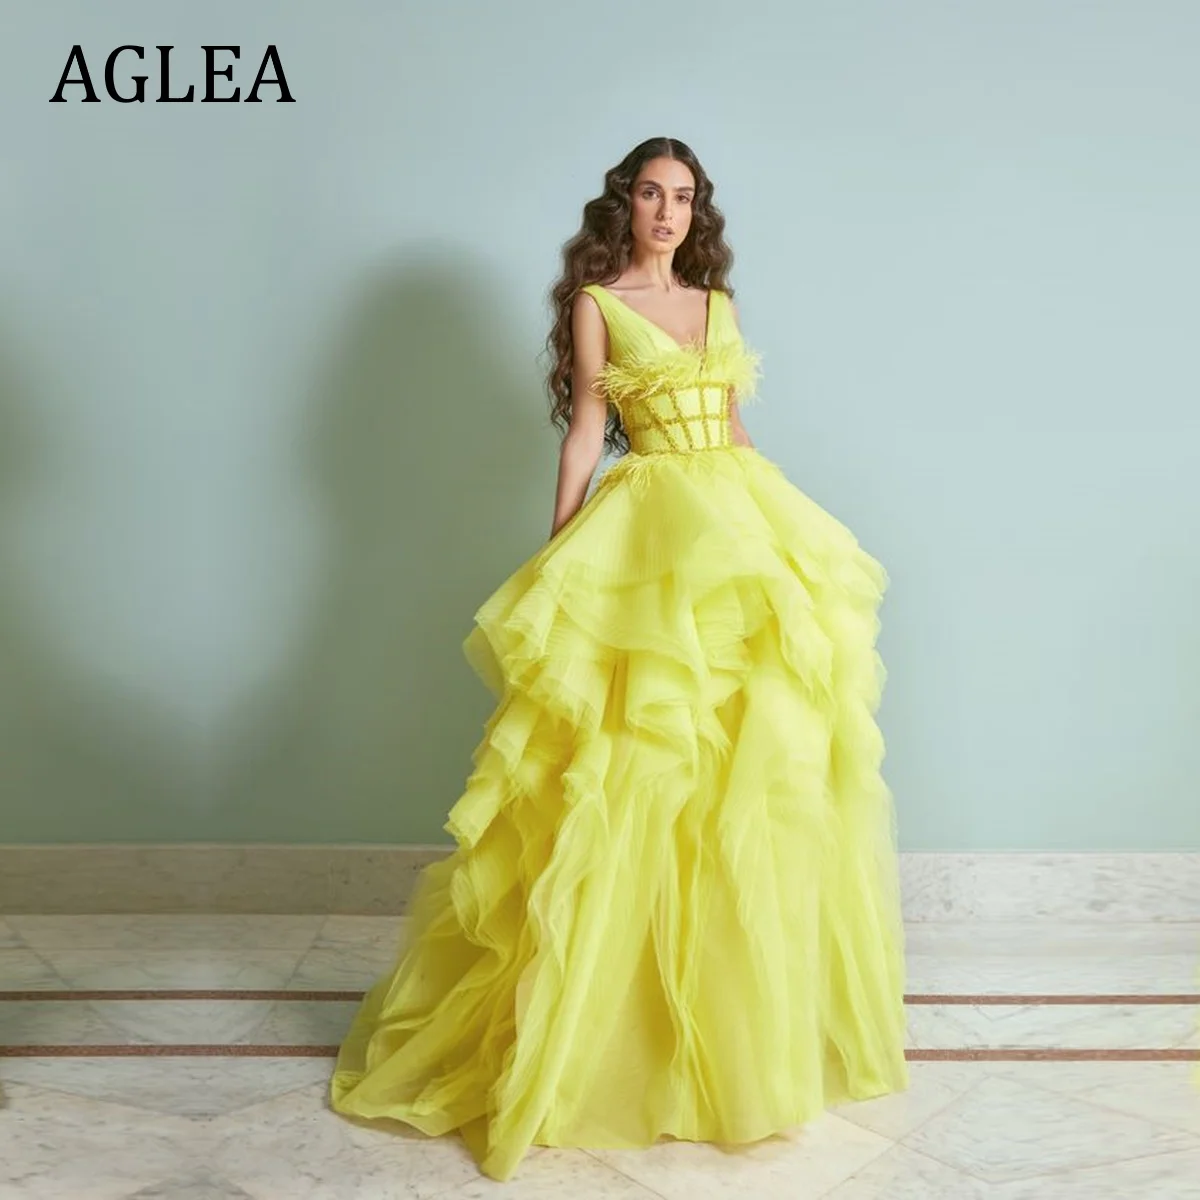 

AGLEA Evening Dresses Formal Occasion Elegant Party for Women Prom Floor Length V-neck Empire A-line Feathers Ruffle